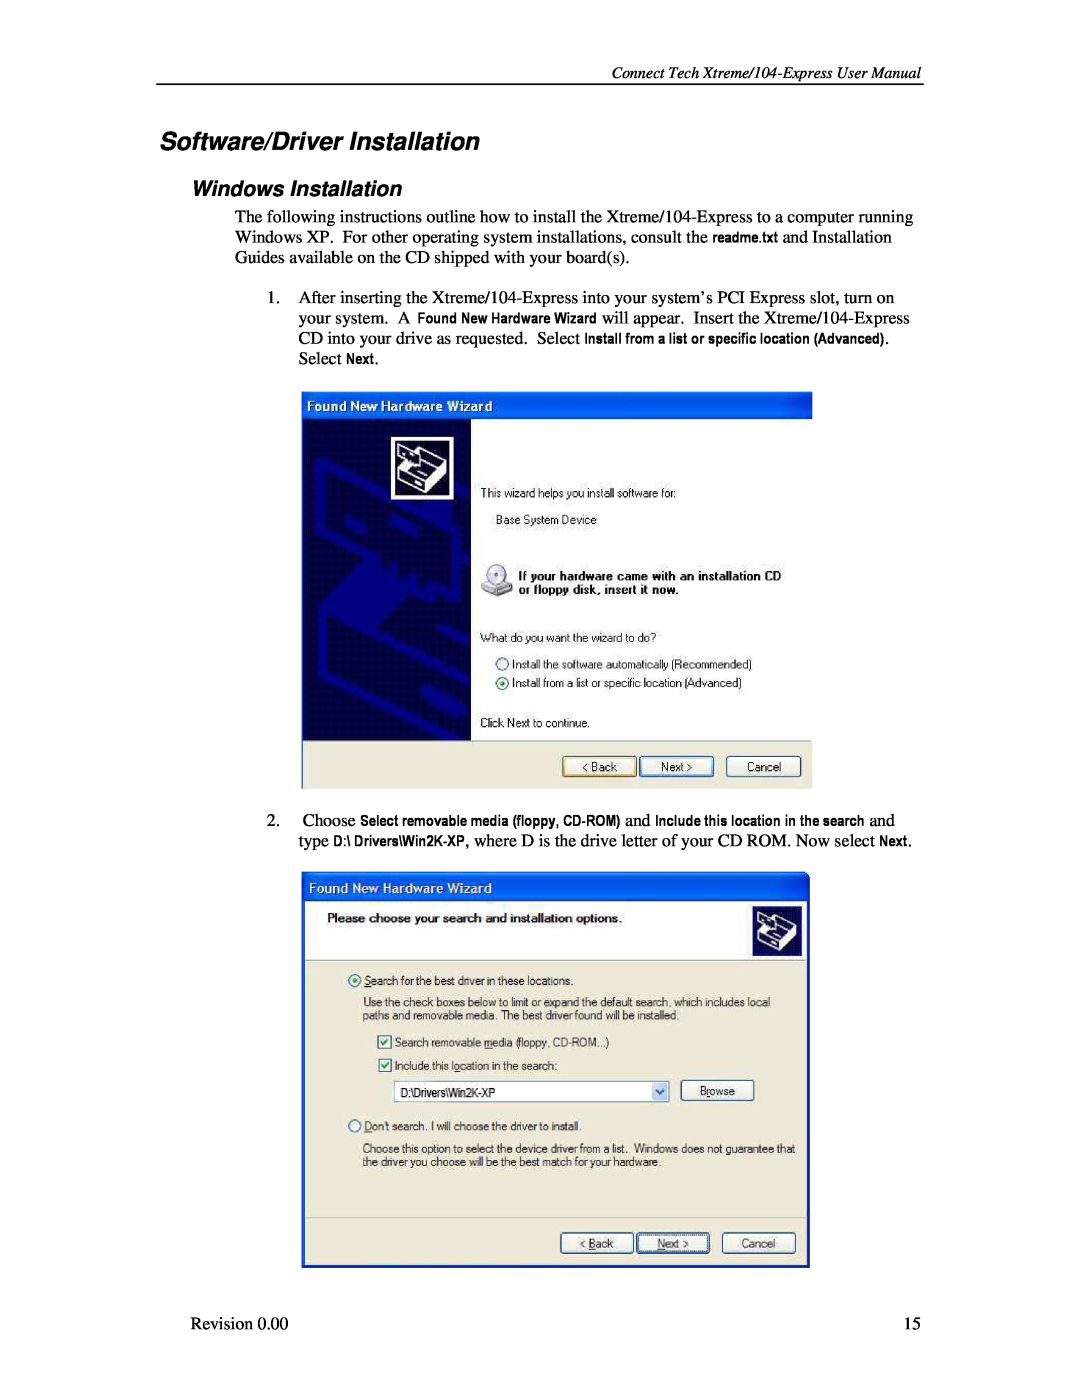 Connect Tech 104 user manual Software/Driver Installation, Windows Installation 